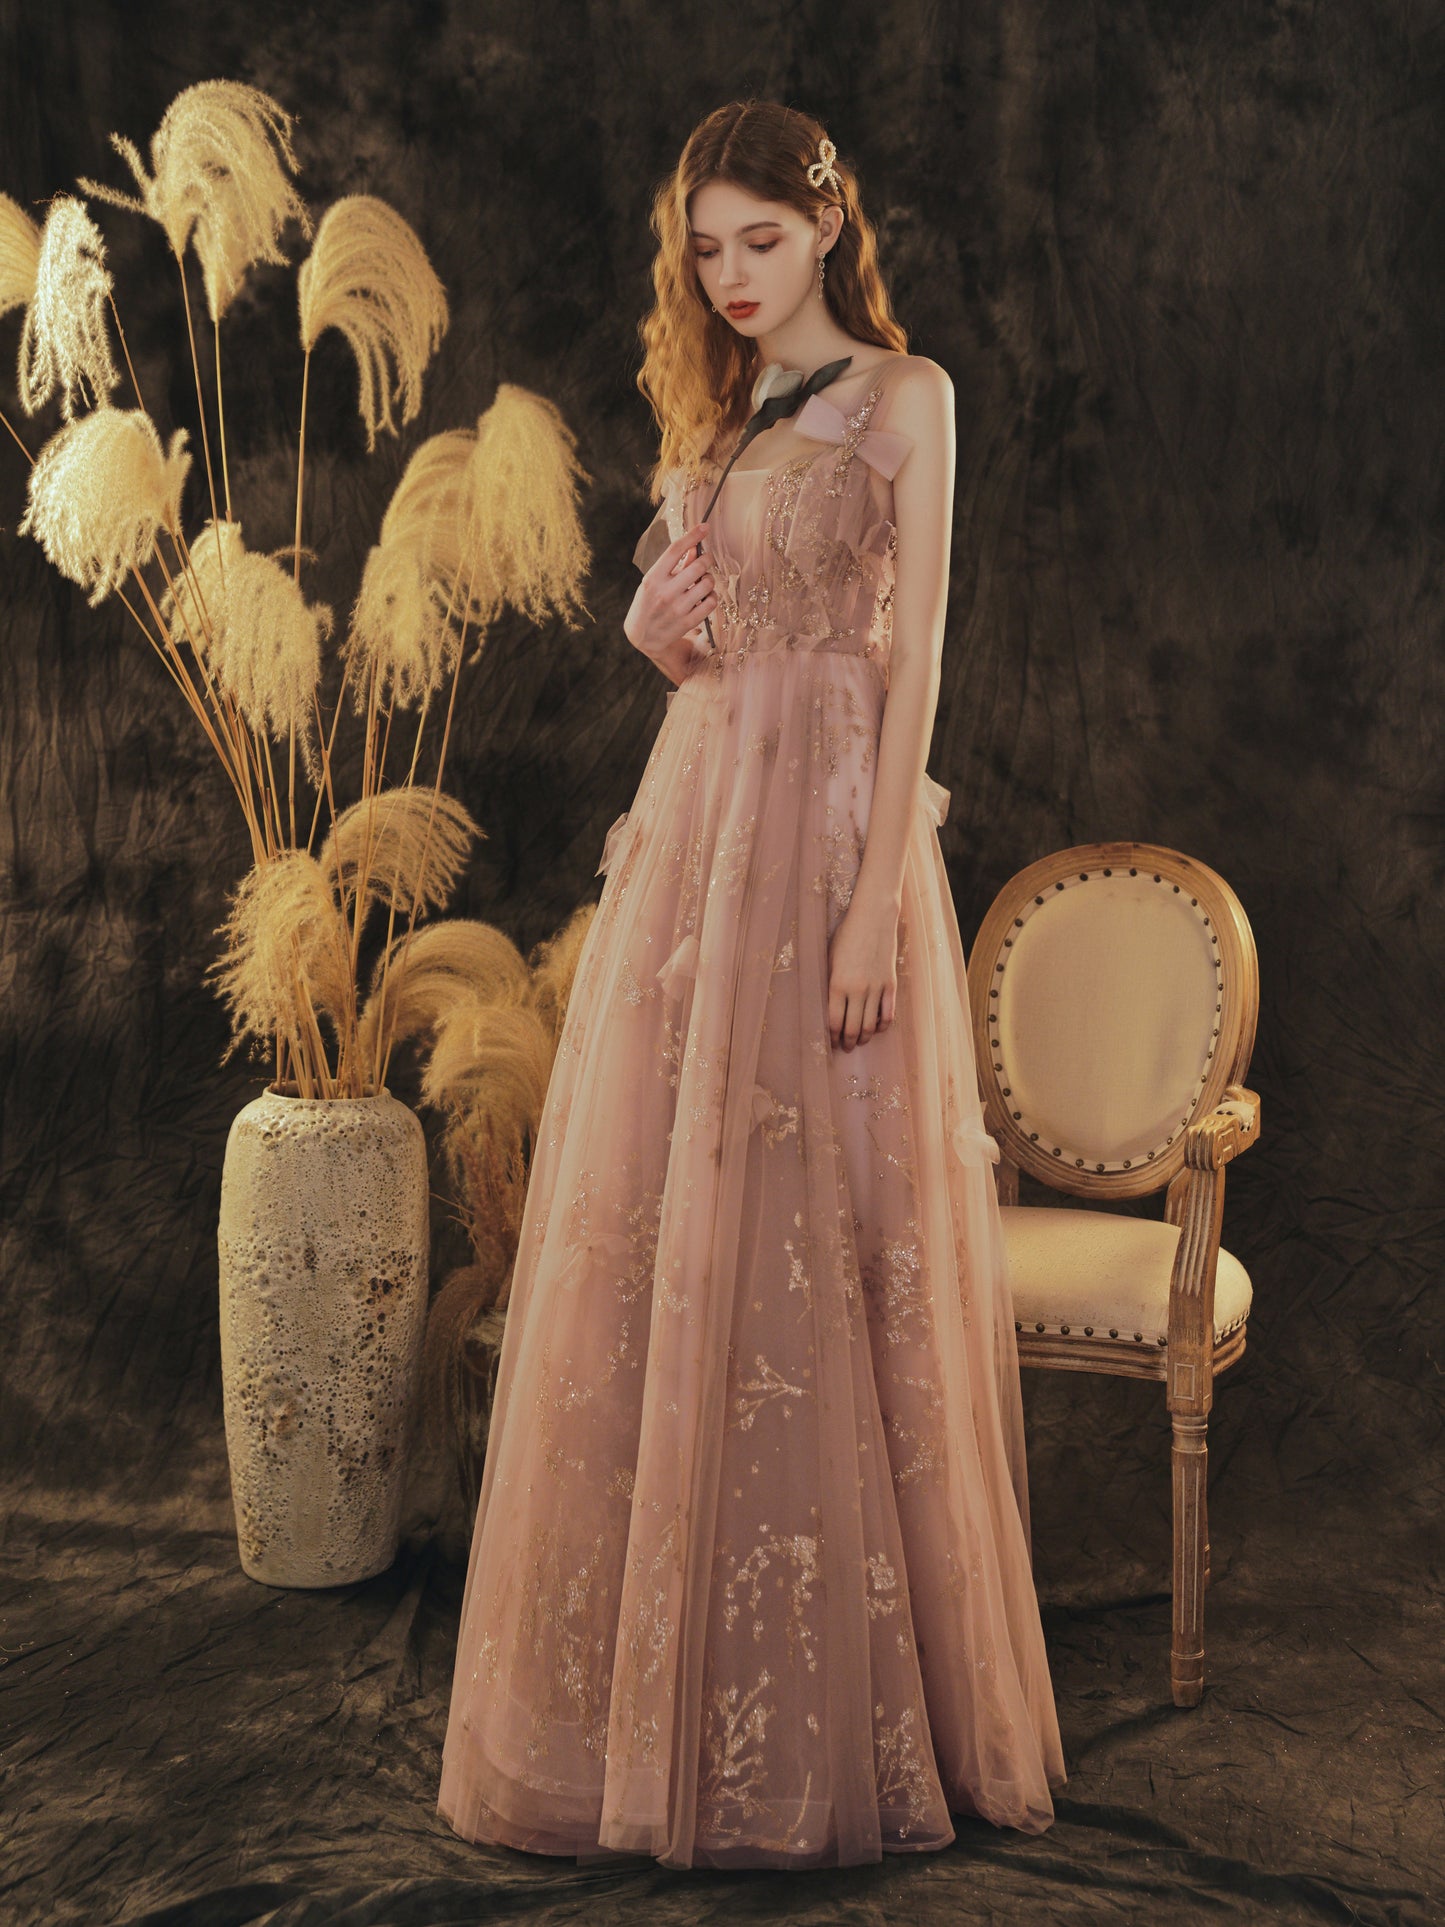 Elegant Rose Gold Glitter Tulle Evening Gown with Bow Accents - Harmony Gallery